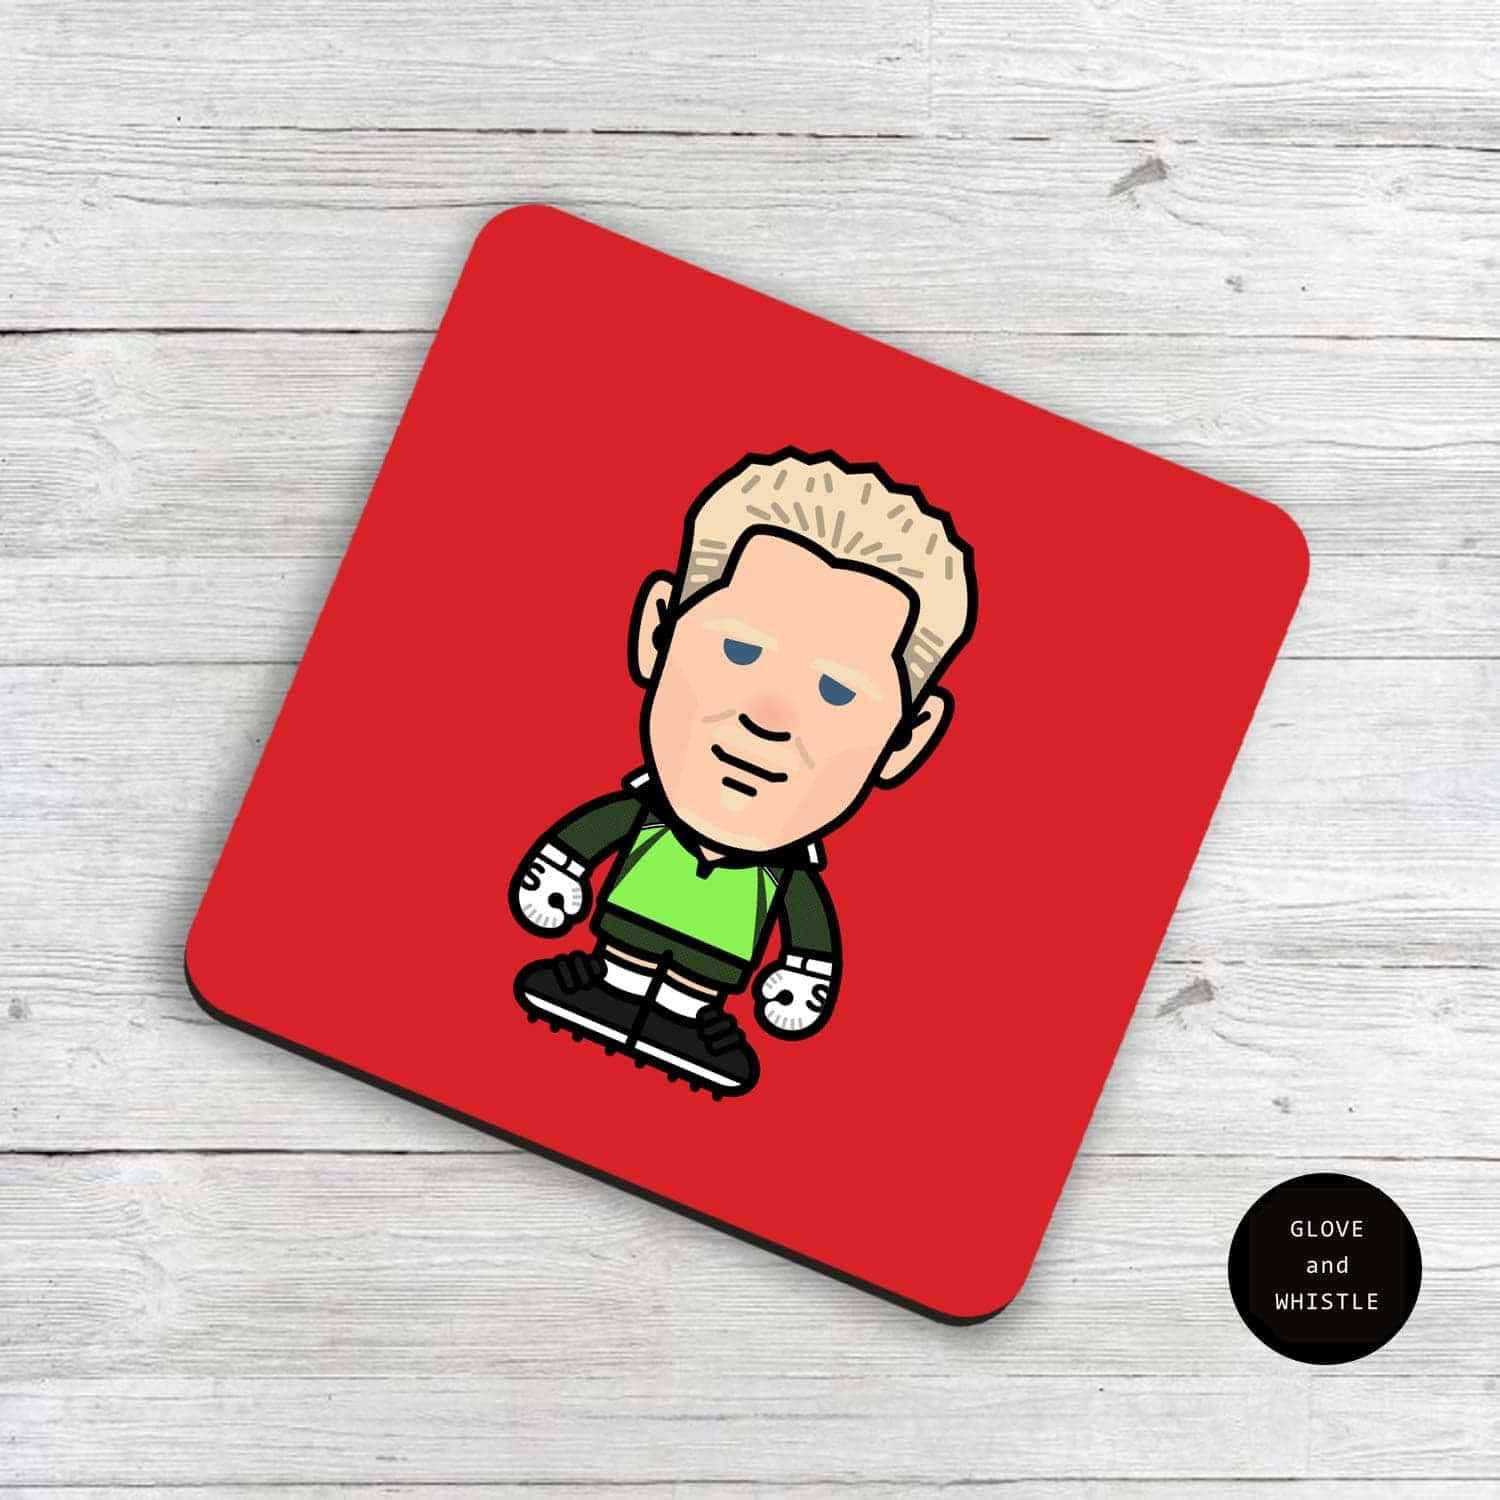 Peter Schmeichel Red Coaster Drawing Wallpaper